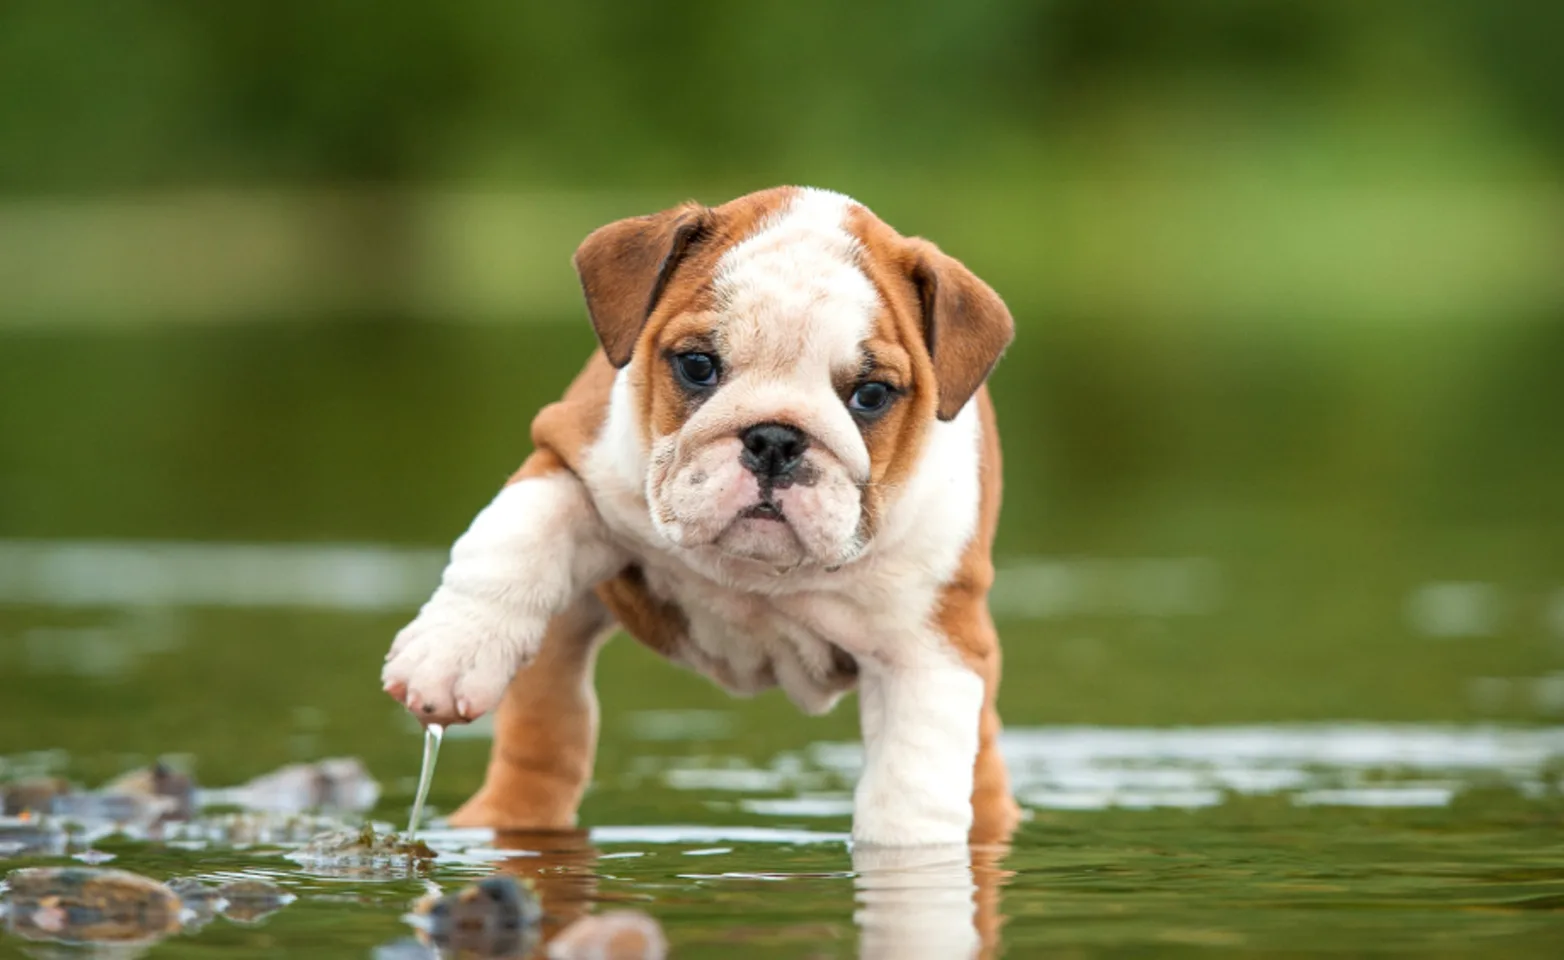 English bulldog puppy standing in shallow creek bed